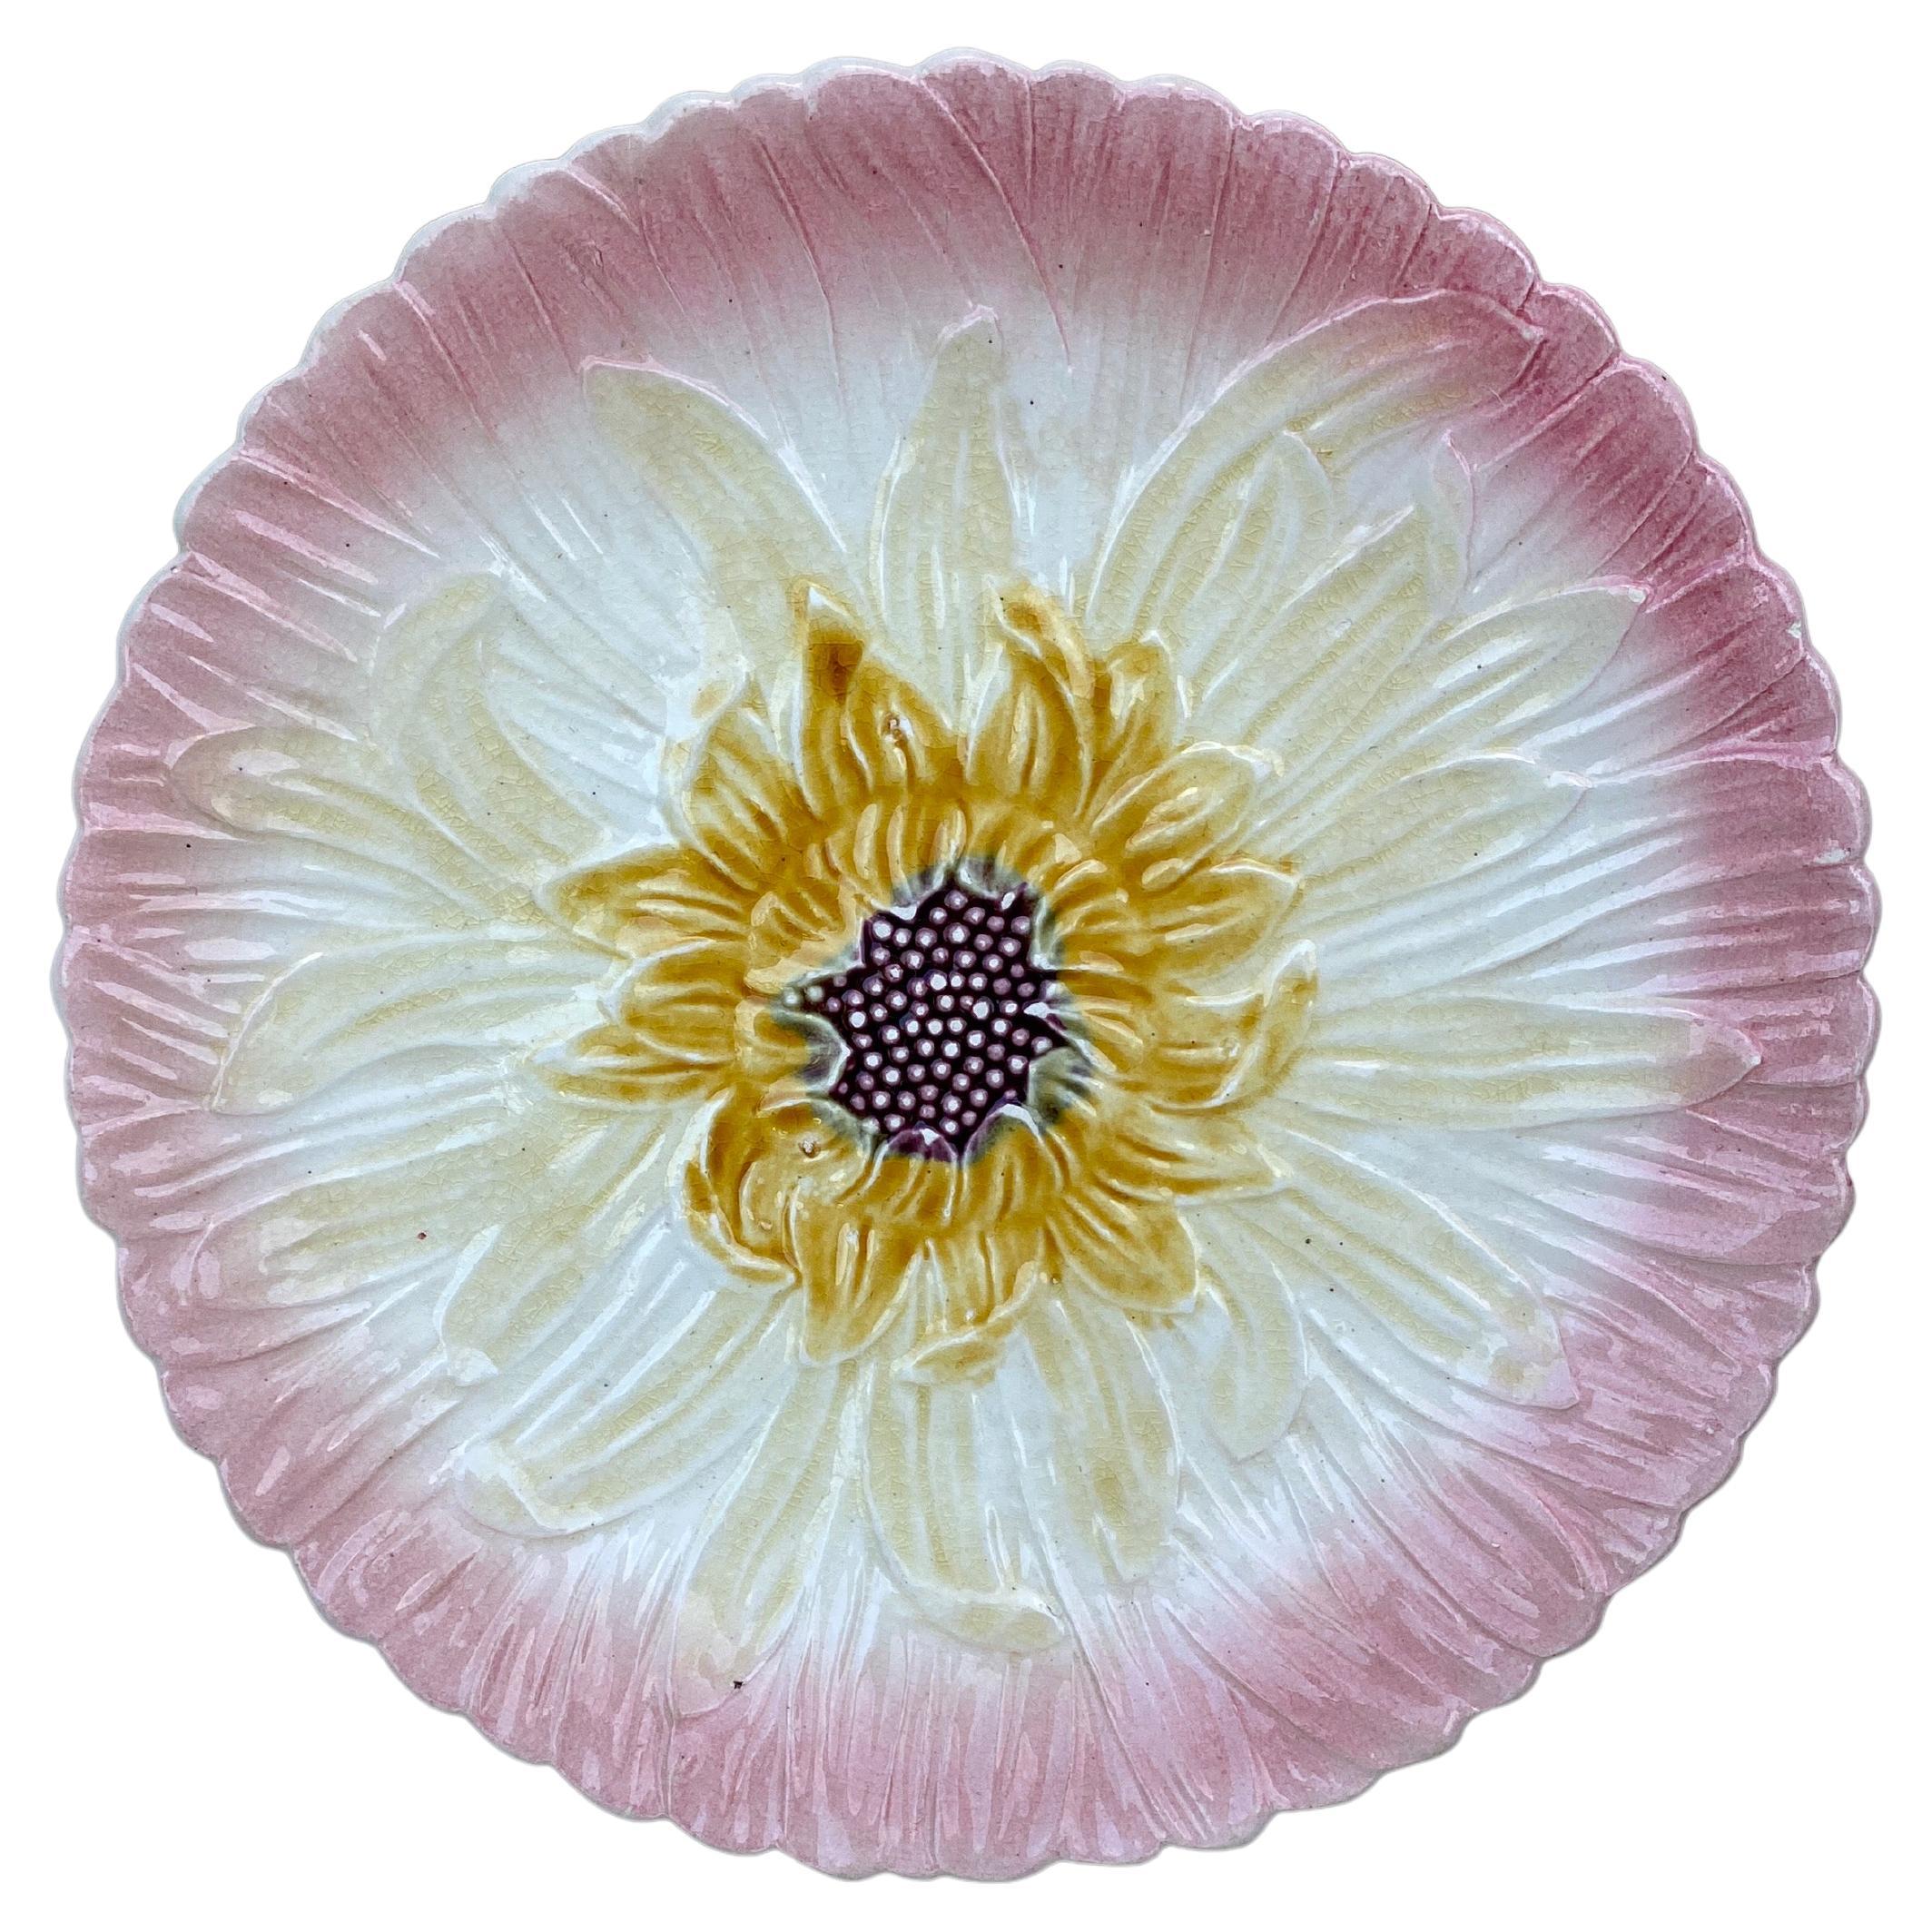 French Majolica Pink Daisy Plate Orchies, circa 1890